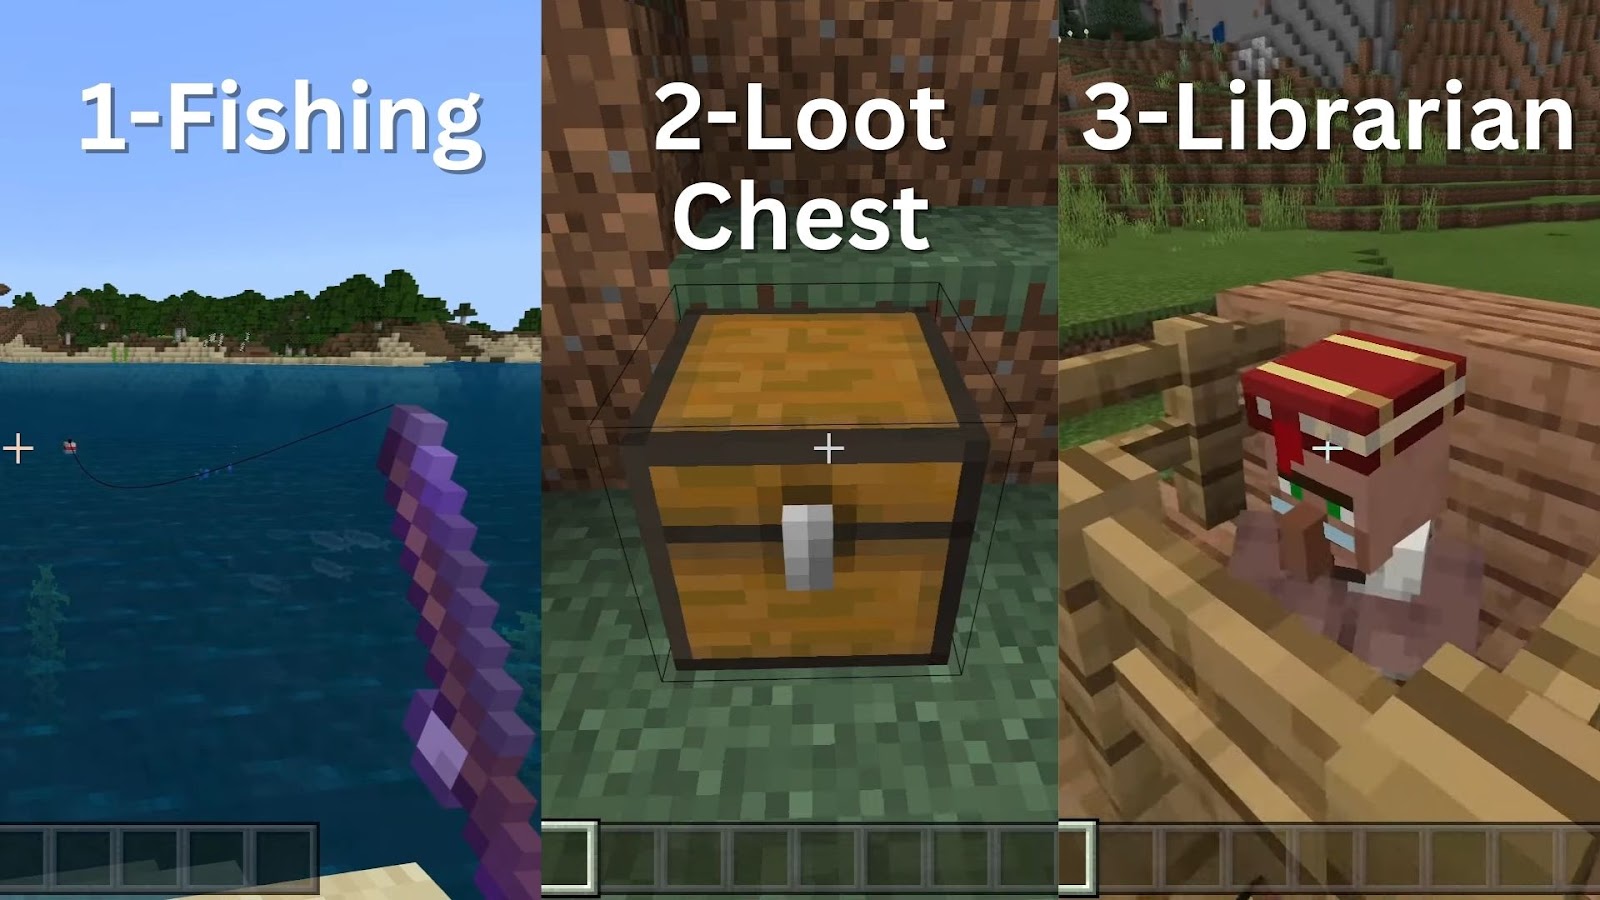 3 Methods to Obtain Fortune Enchantment in Minecraft